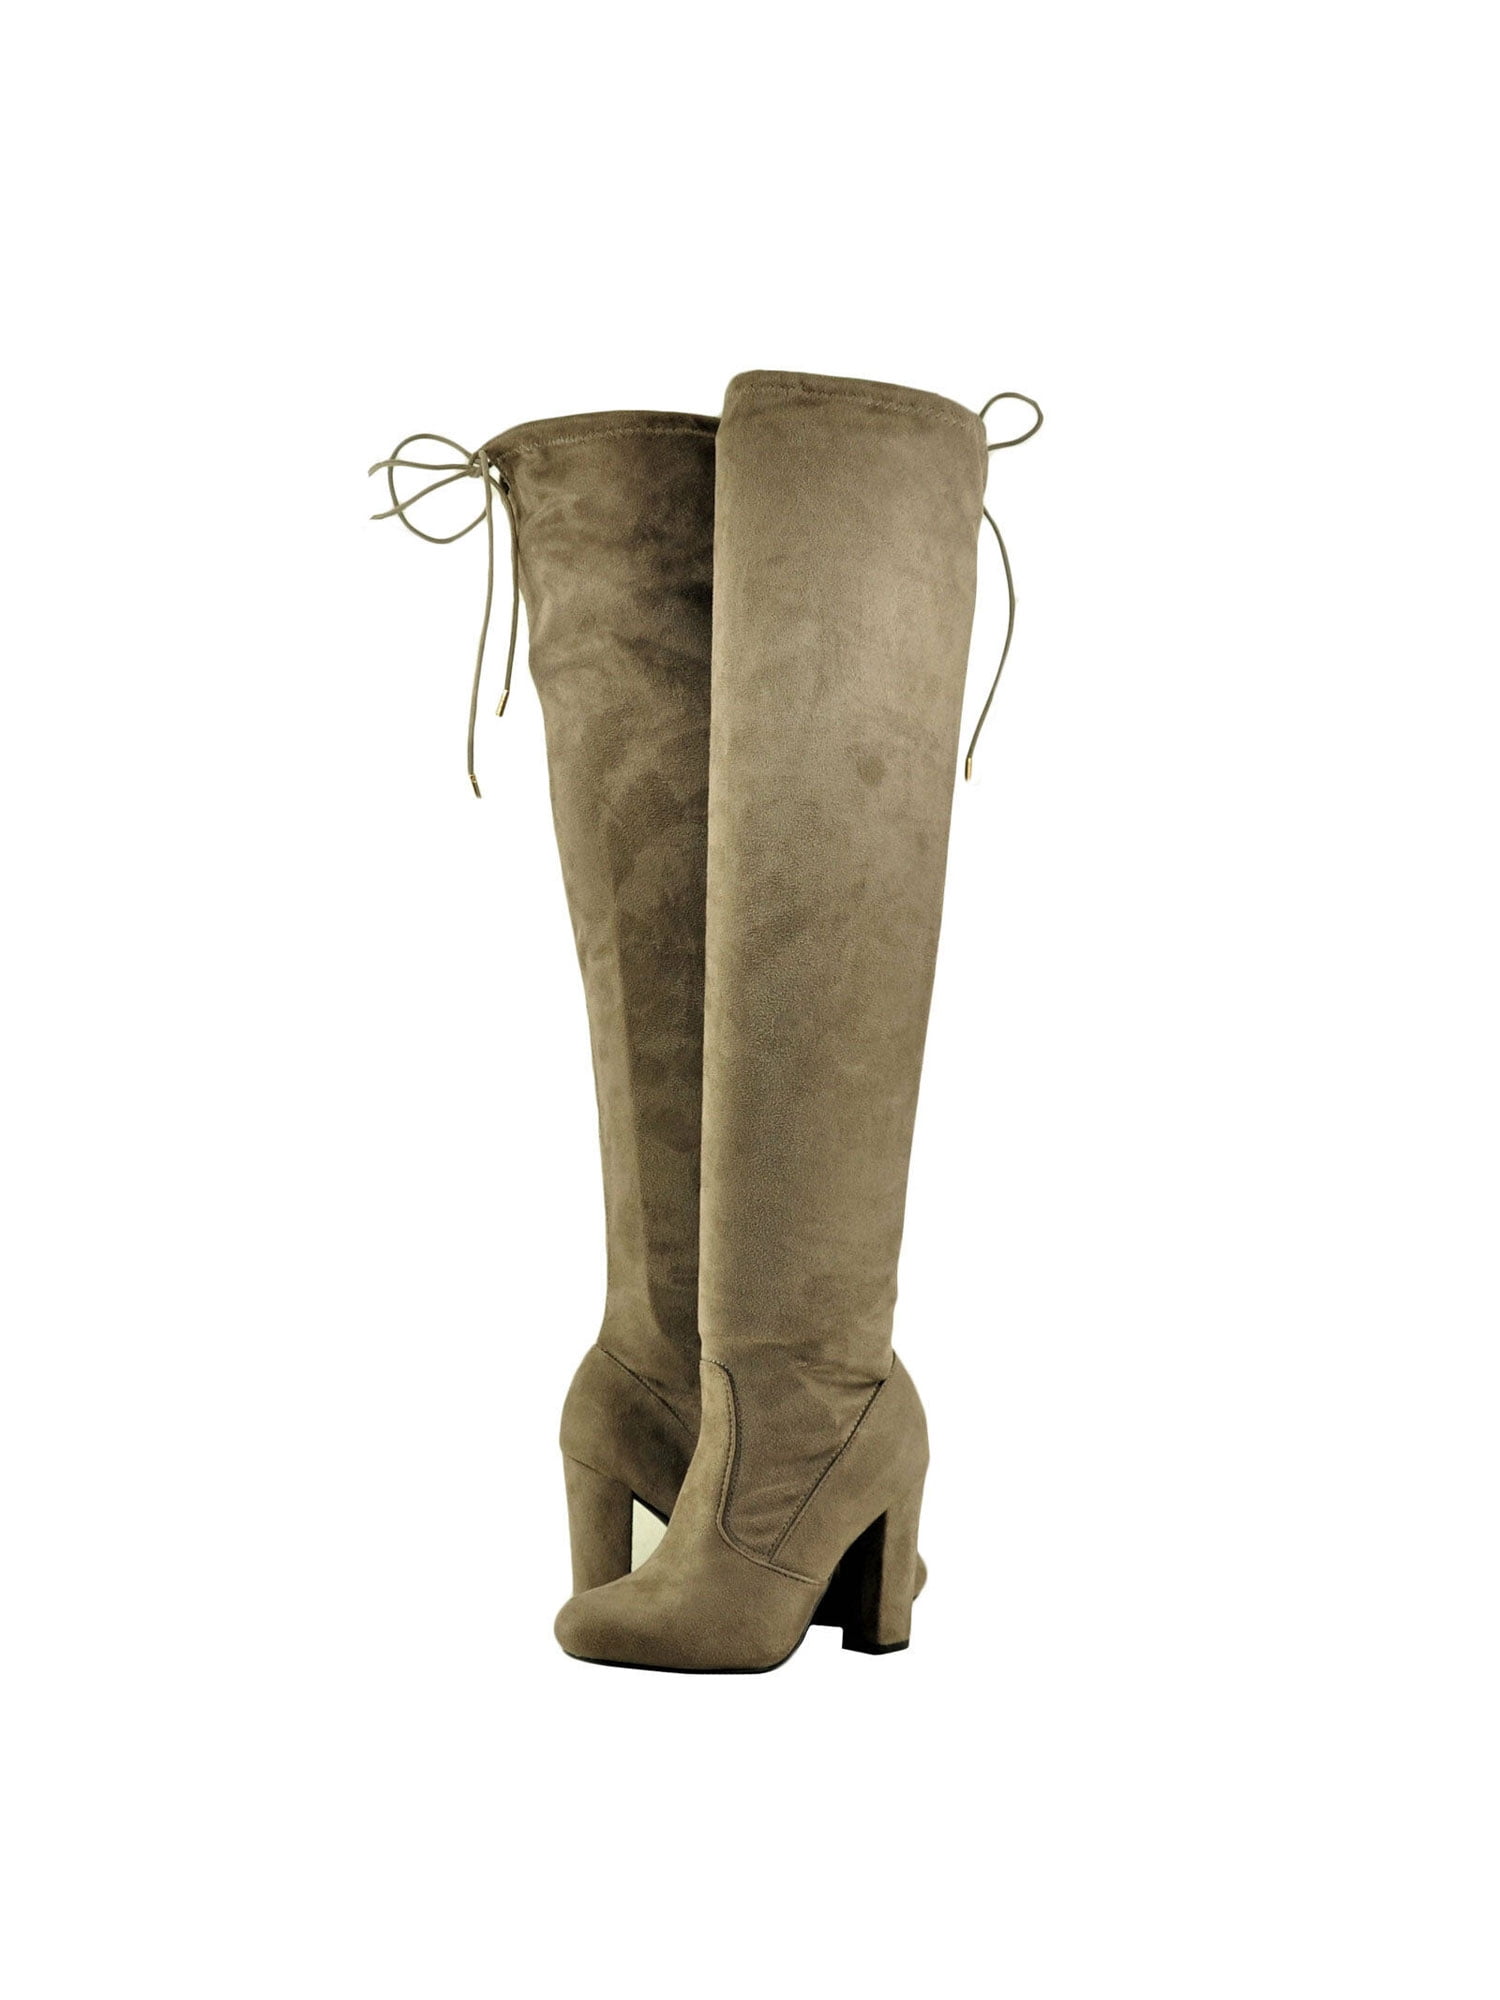 BAMBOO Hilltop 20M Womens Over The Knee Stretch Zip Boot 